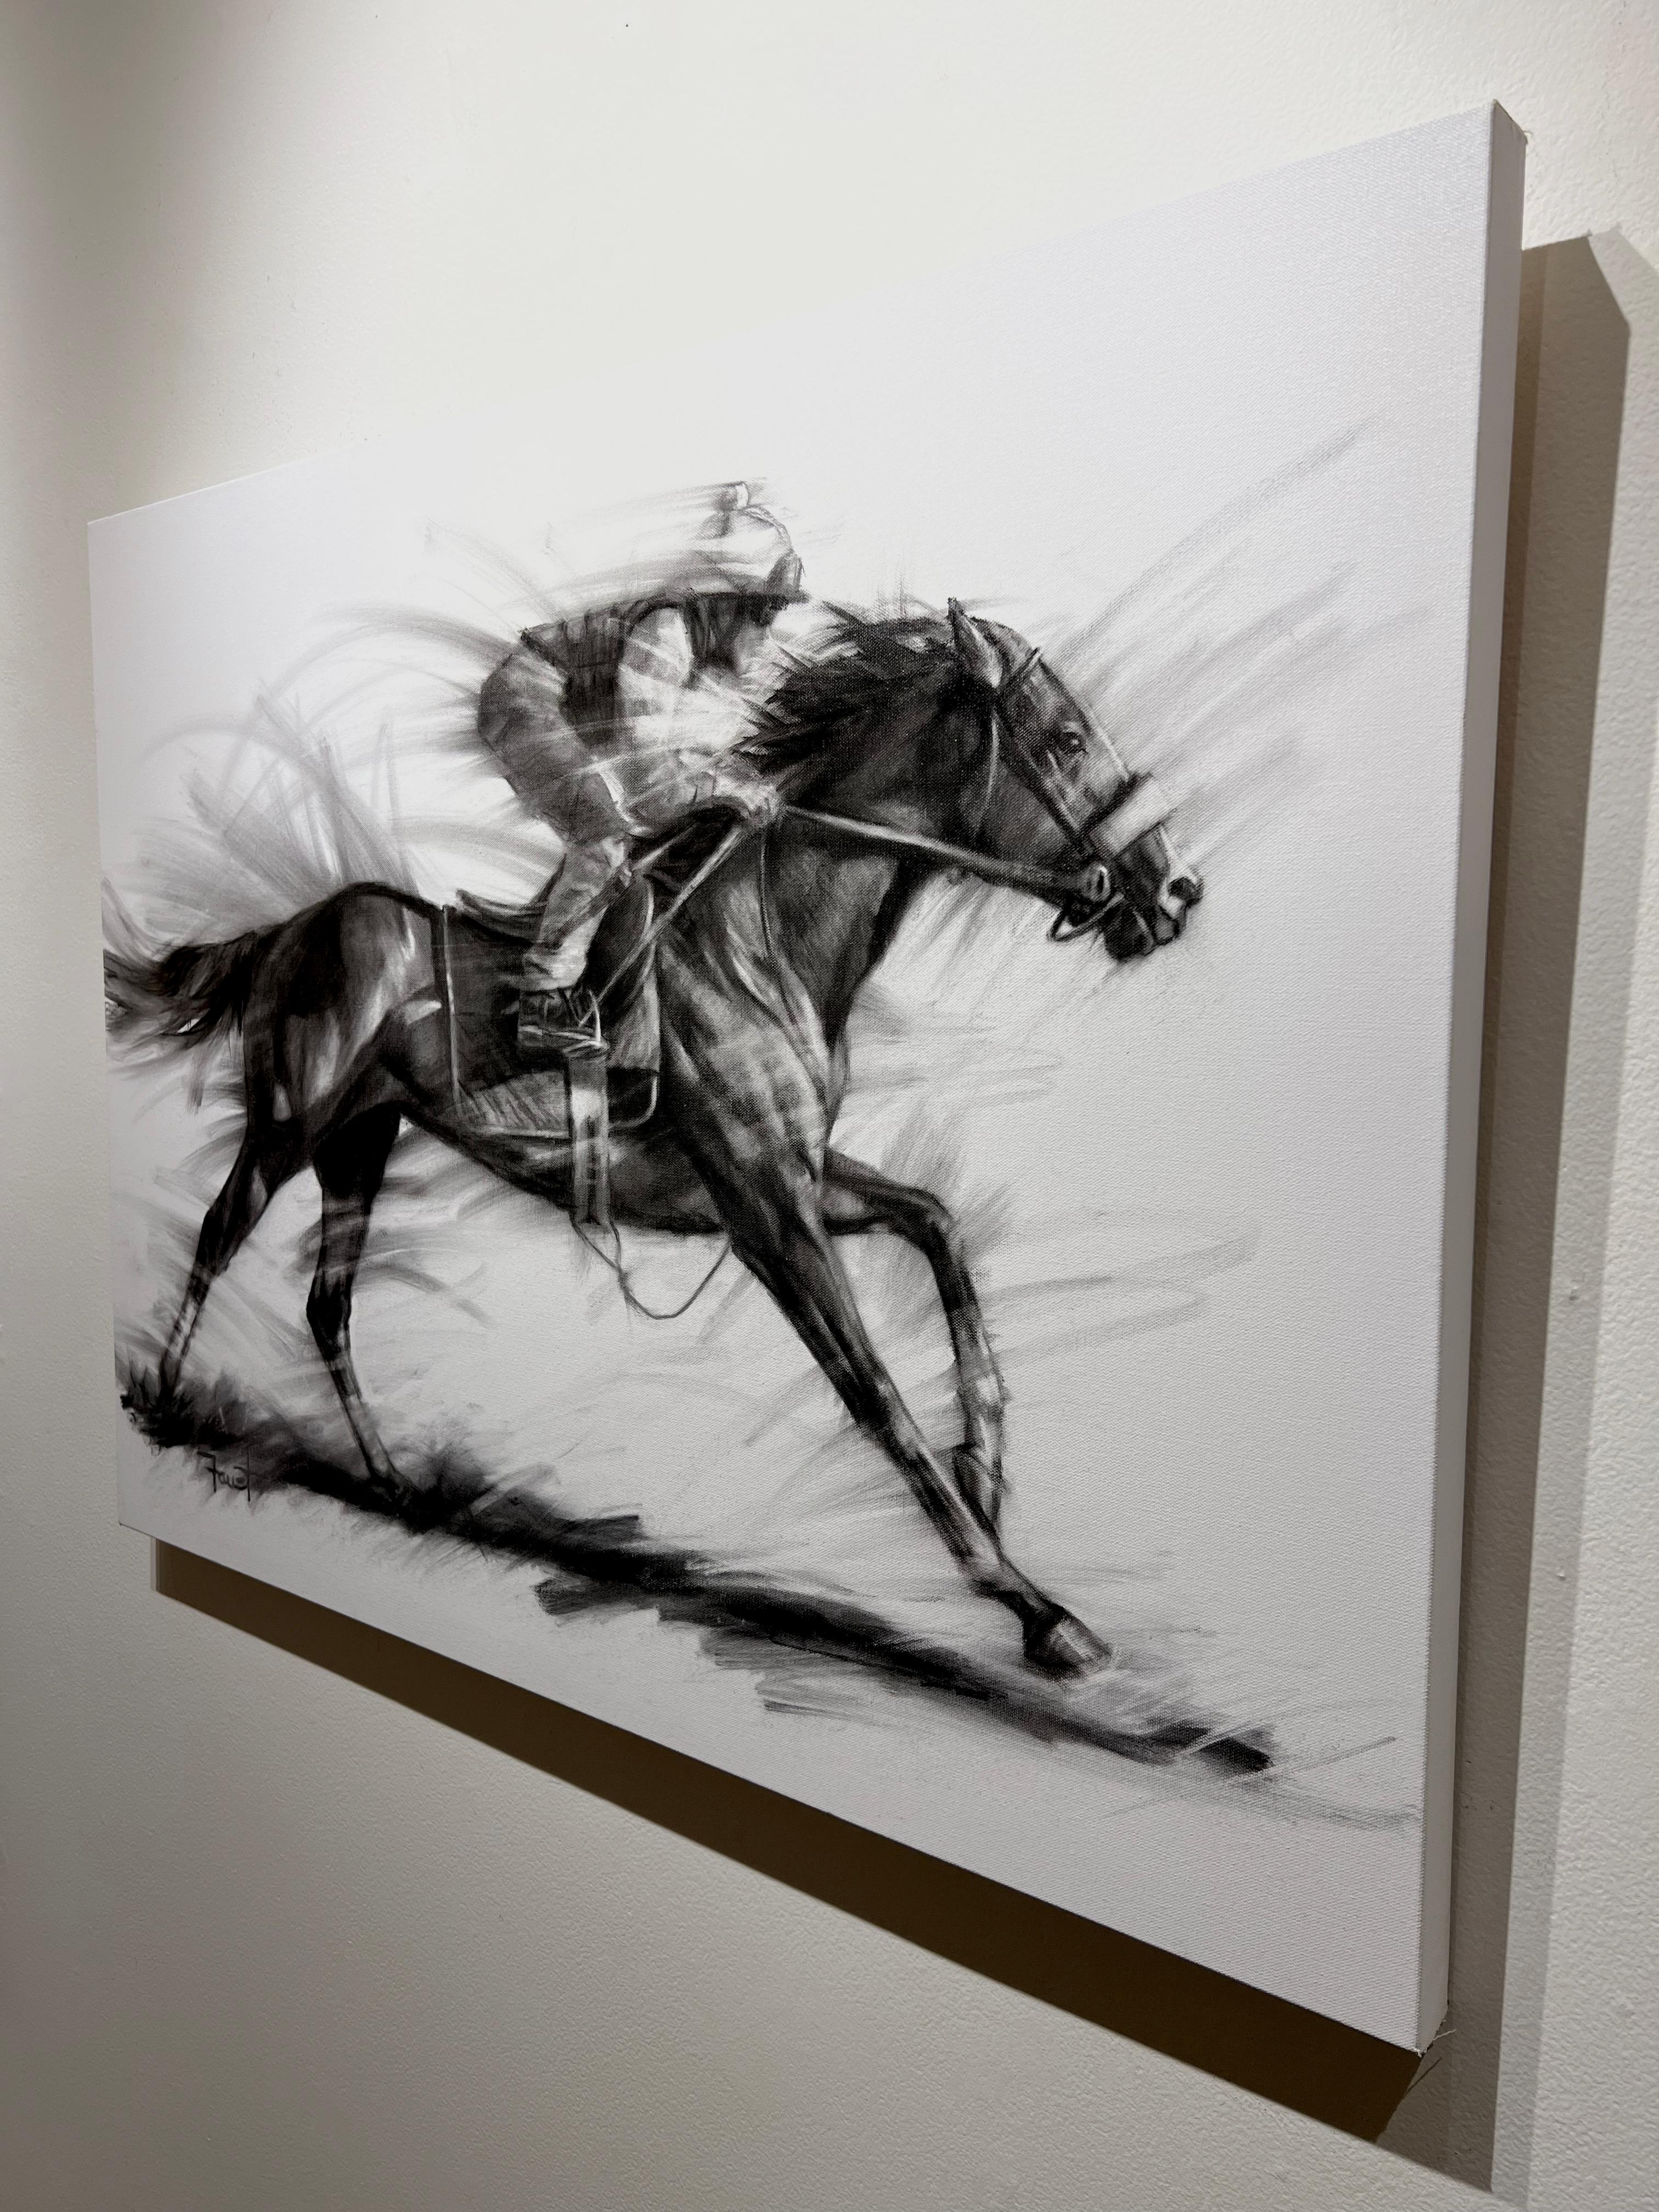 This equine drawing, 